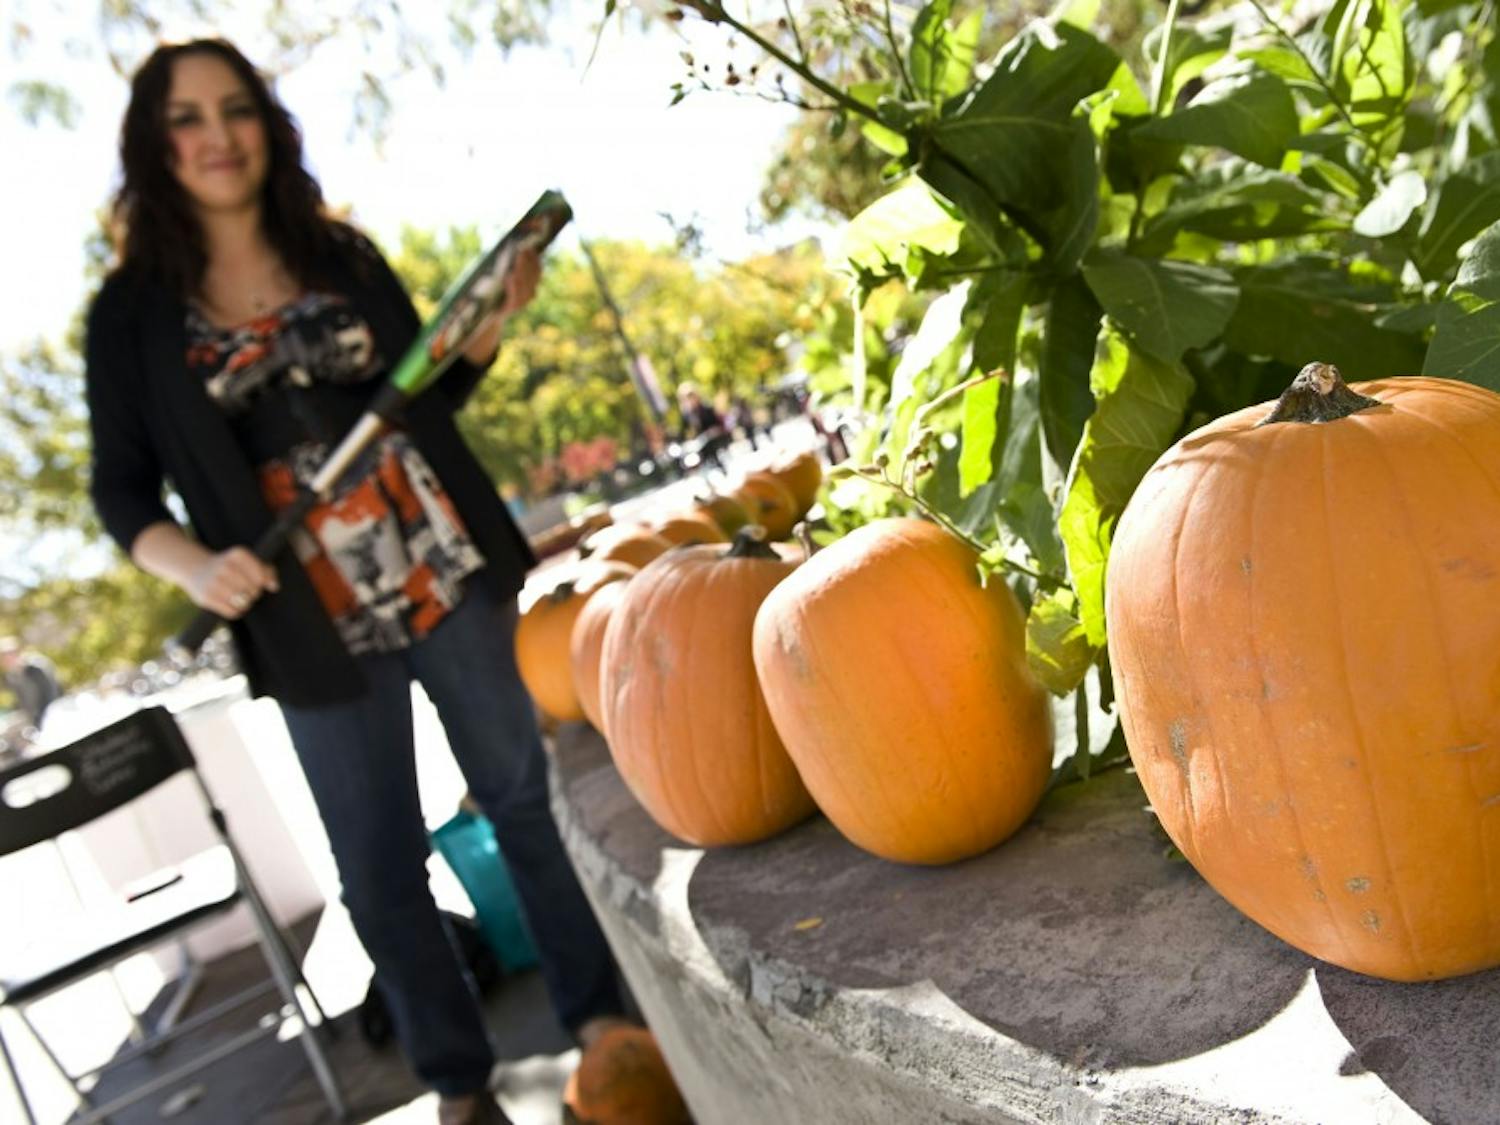 	Student Felicia Alexander stands with a baseball bat outside the SUB on Tuesday. Her group, Nourish International, held a bake sale and pumpkin-smashing event to raise money for sustainable organic agriculture in Nicaragua and Guatemala. 